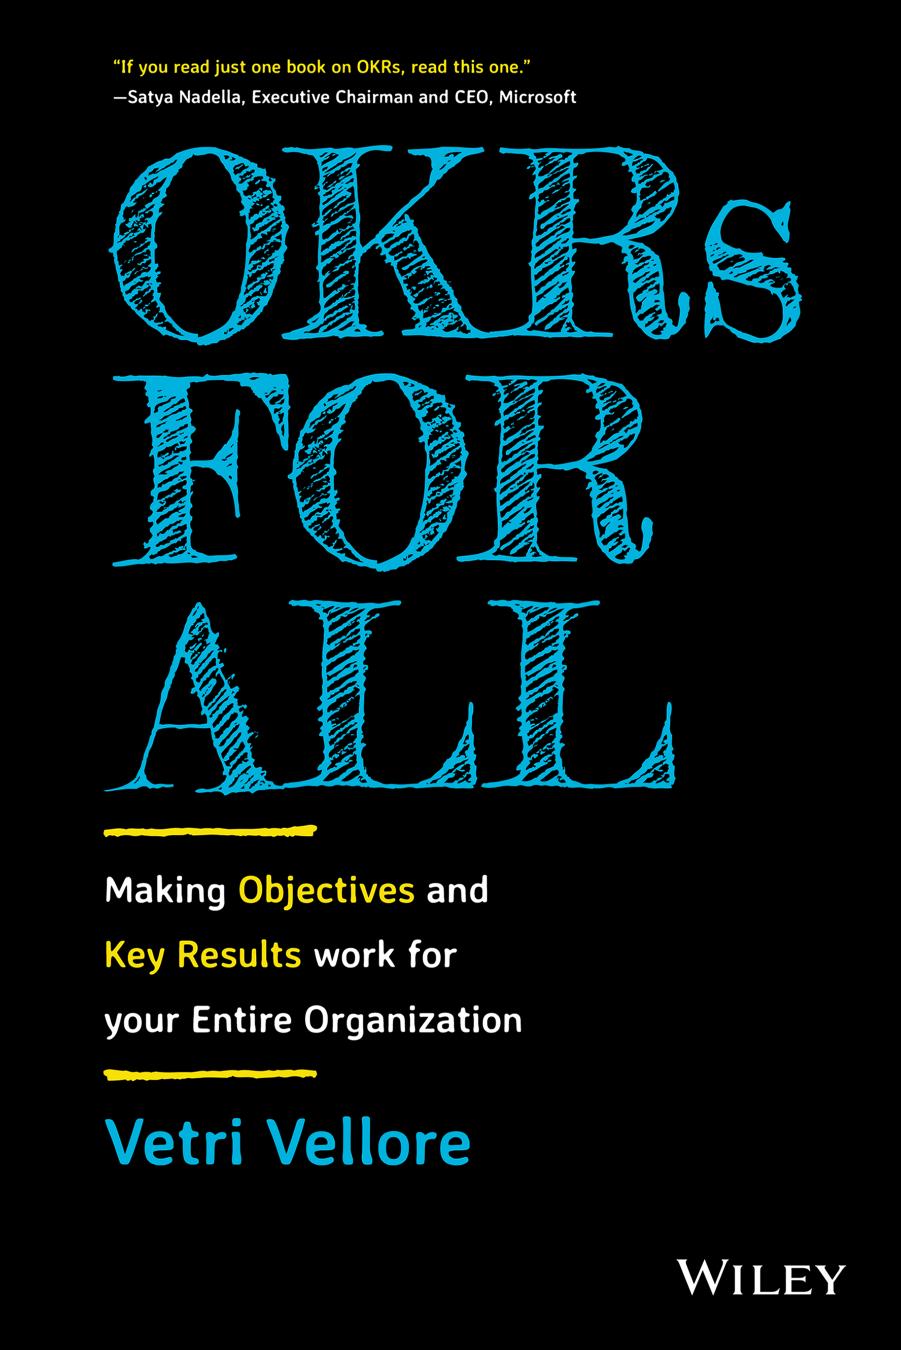 Download OKRs for All: Making Objectives and Key Results Work for your